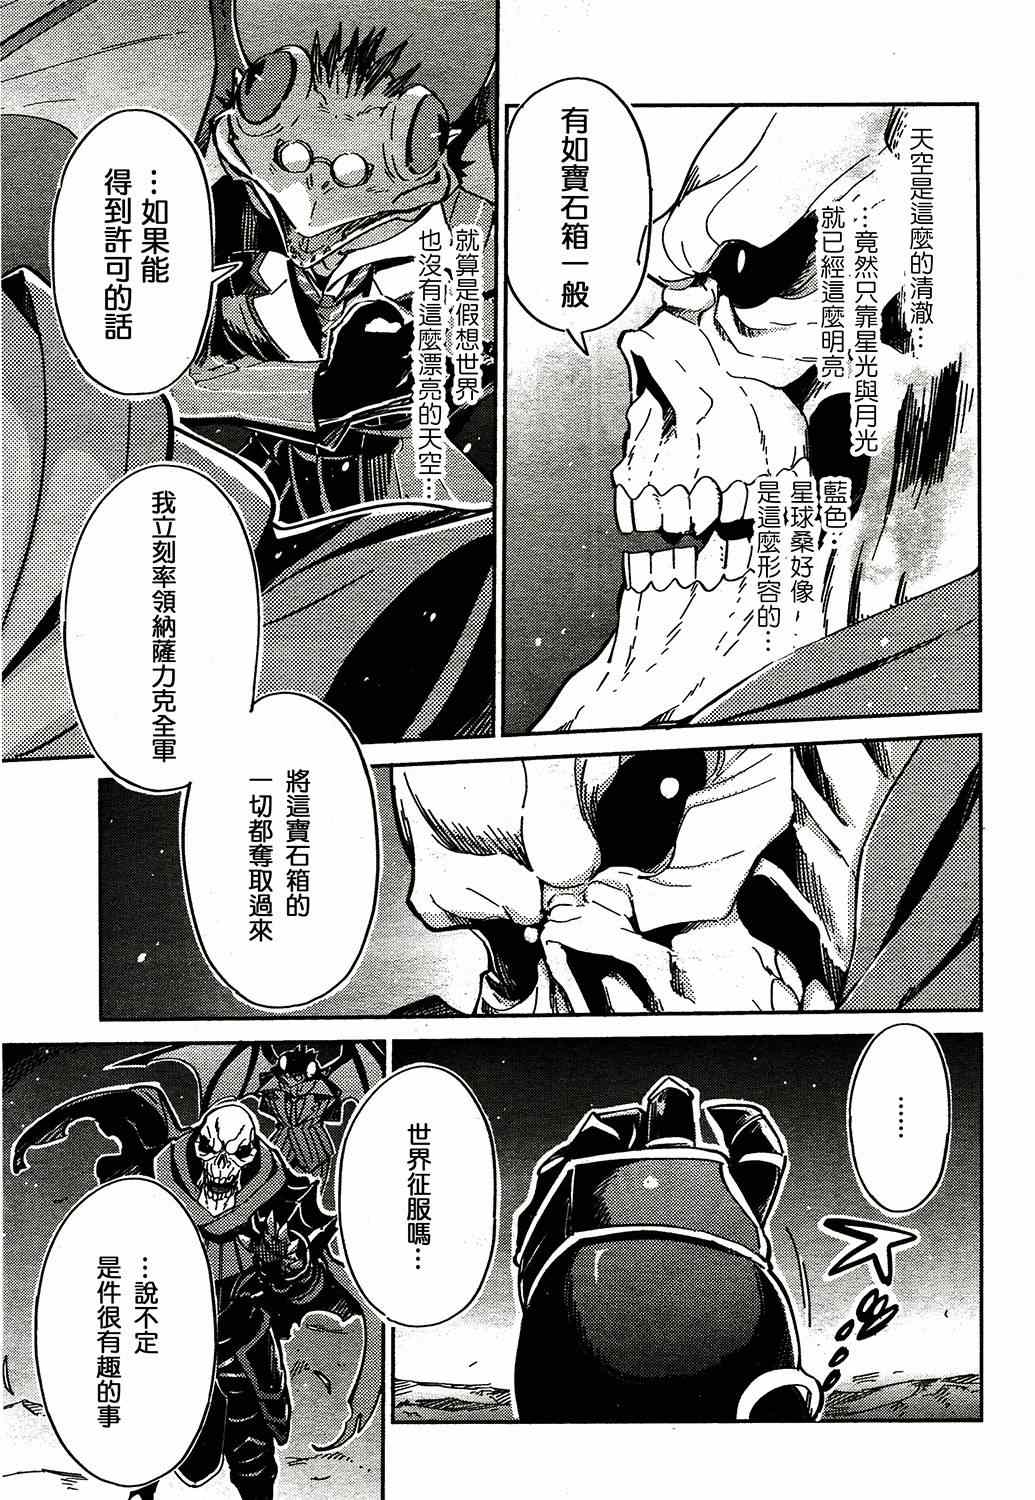 OVERLORD - 第2話 - 3